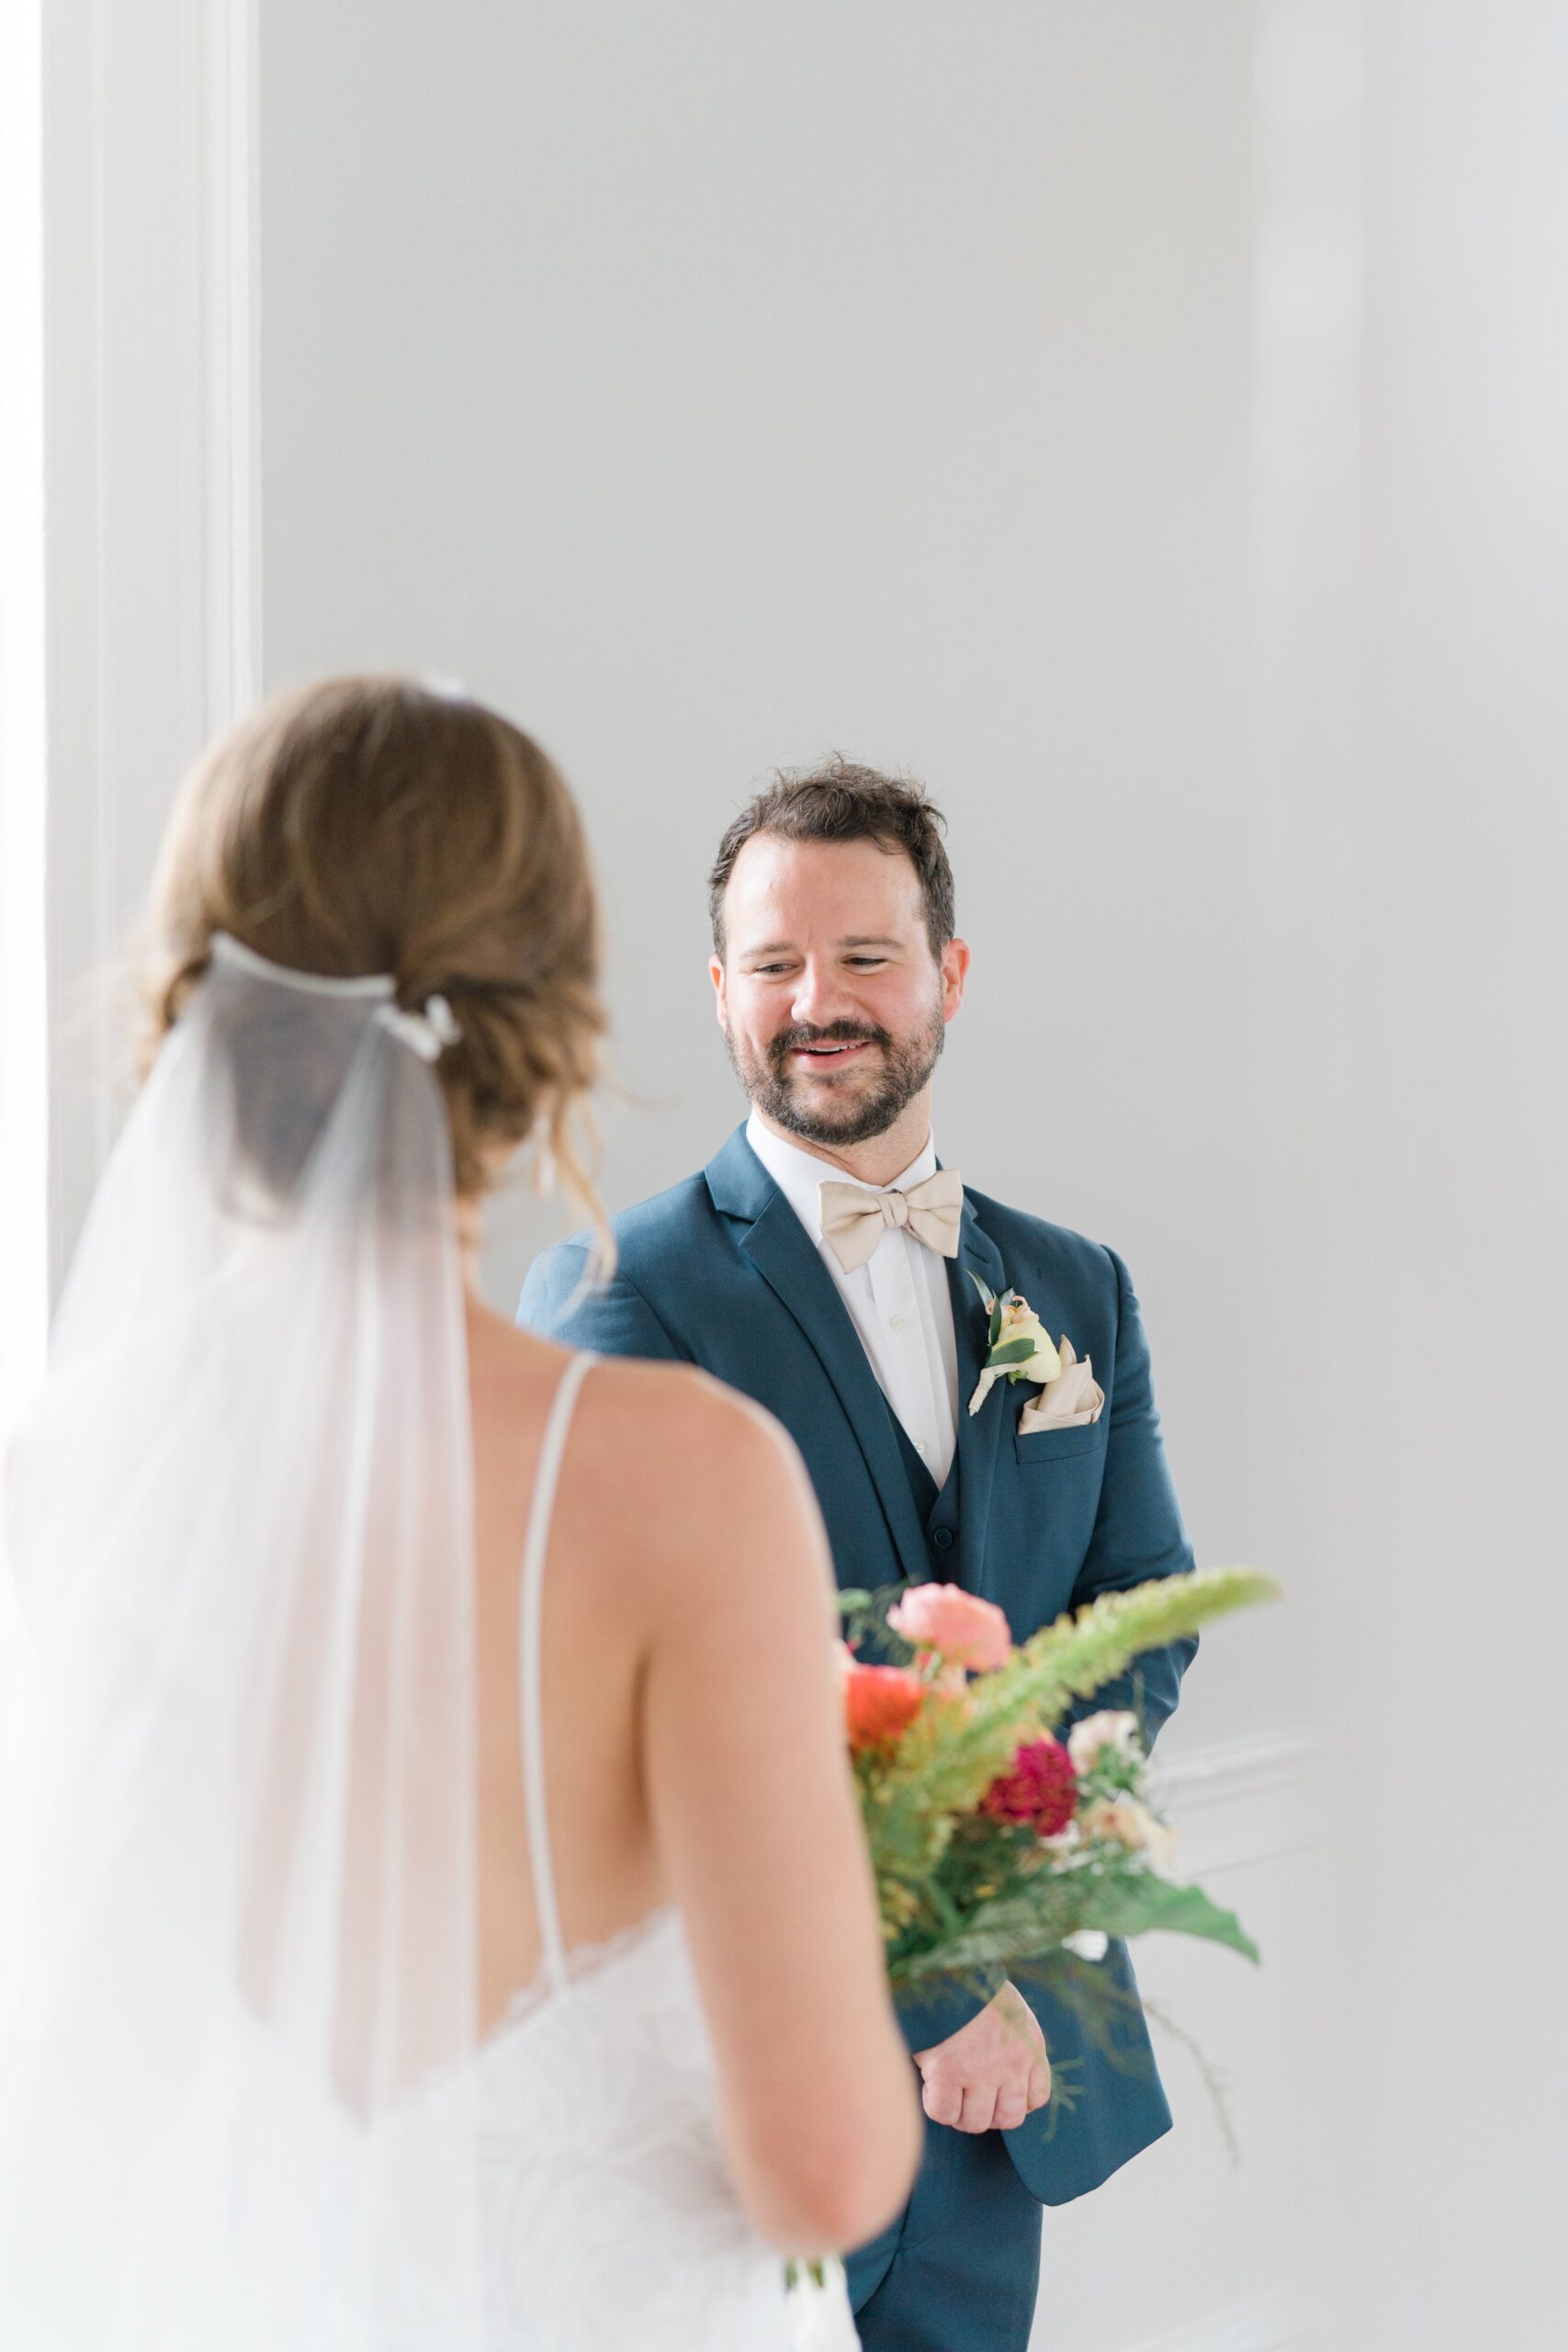 Groom sees bride for the first time at Charleston wedding. Wedding day bride and groom first look.